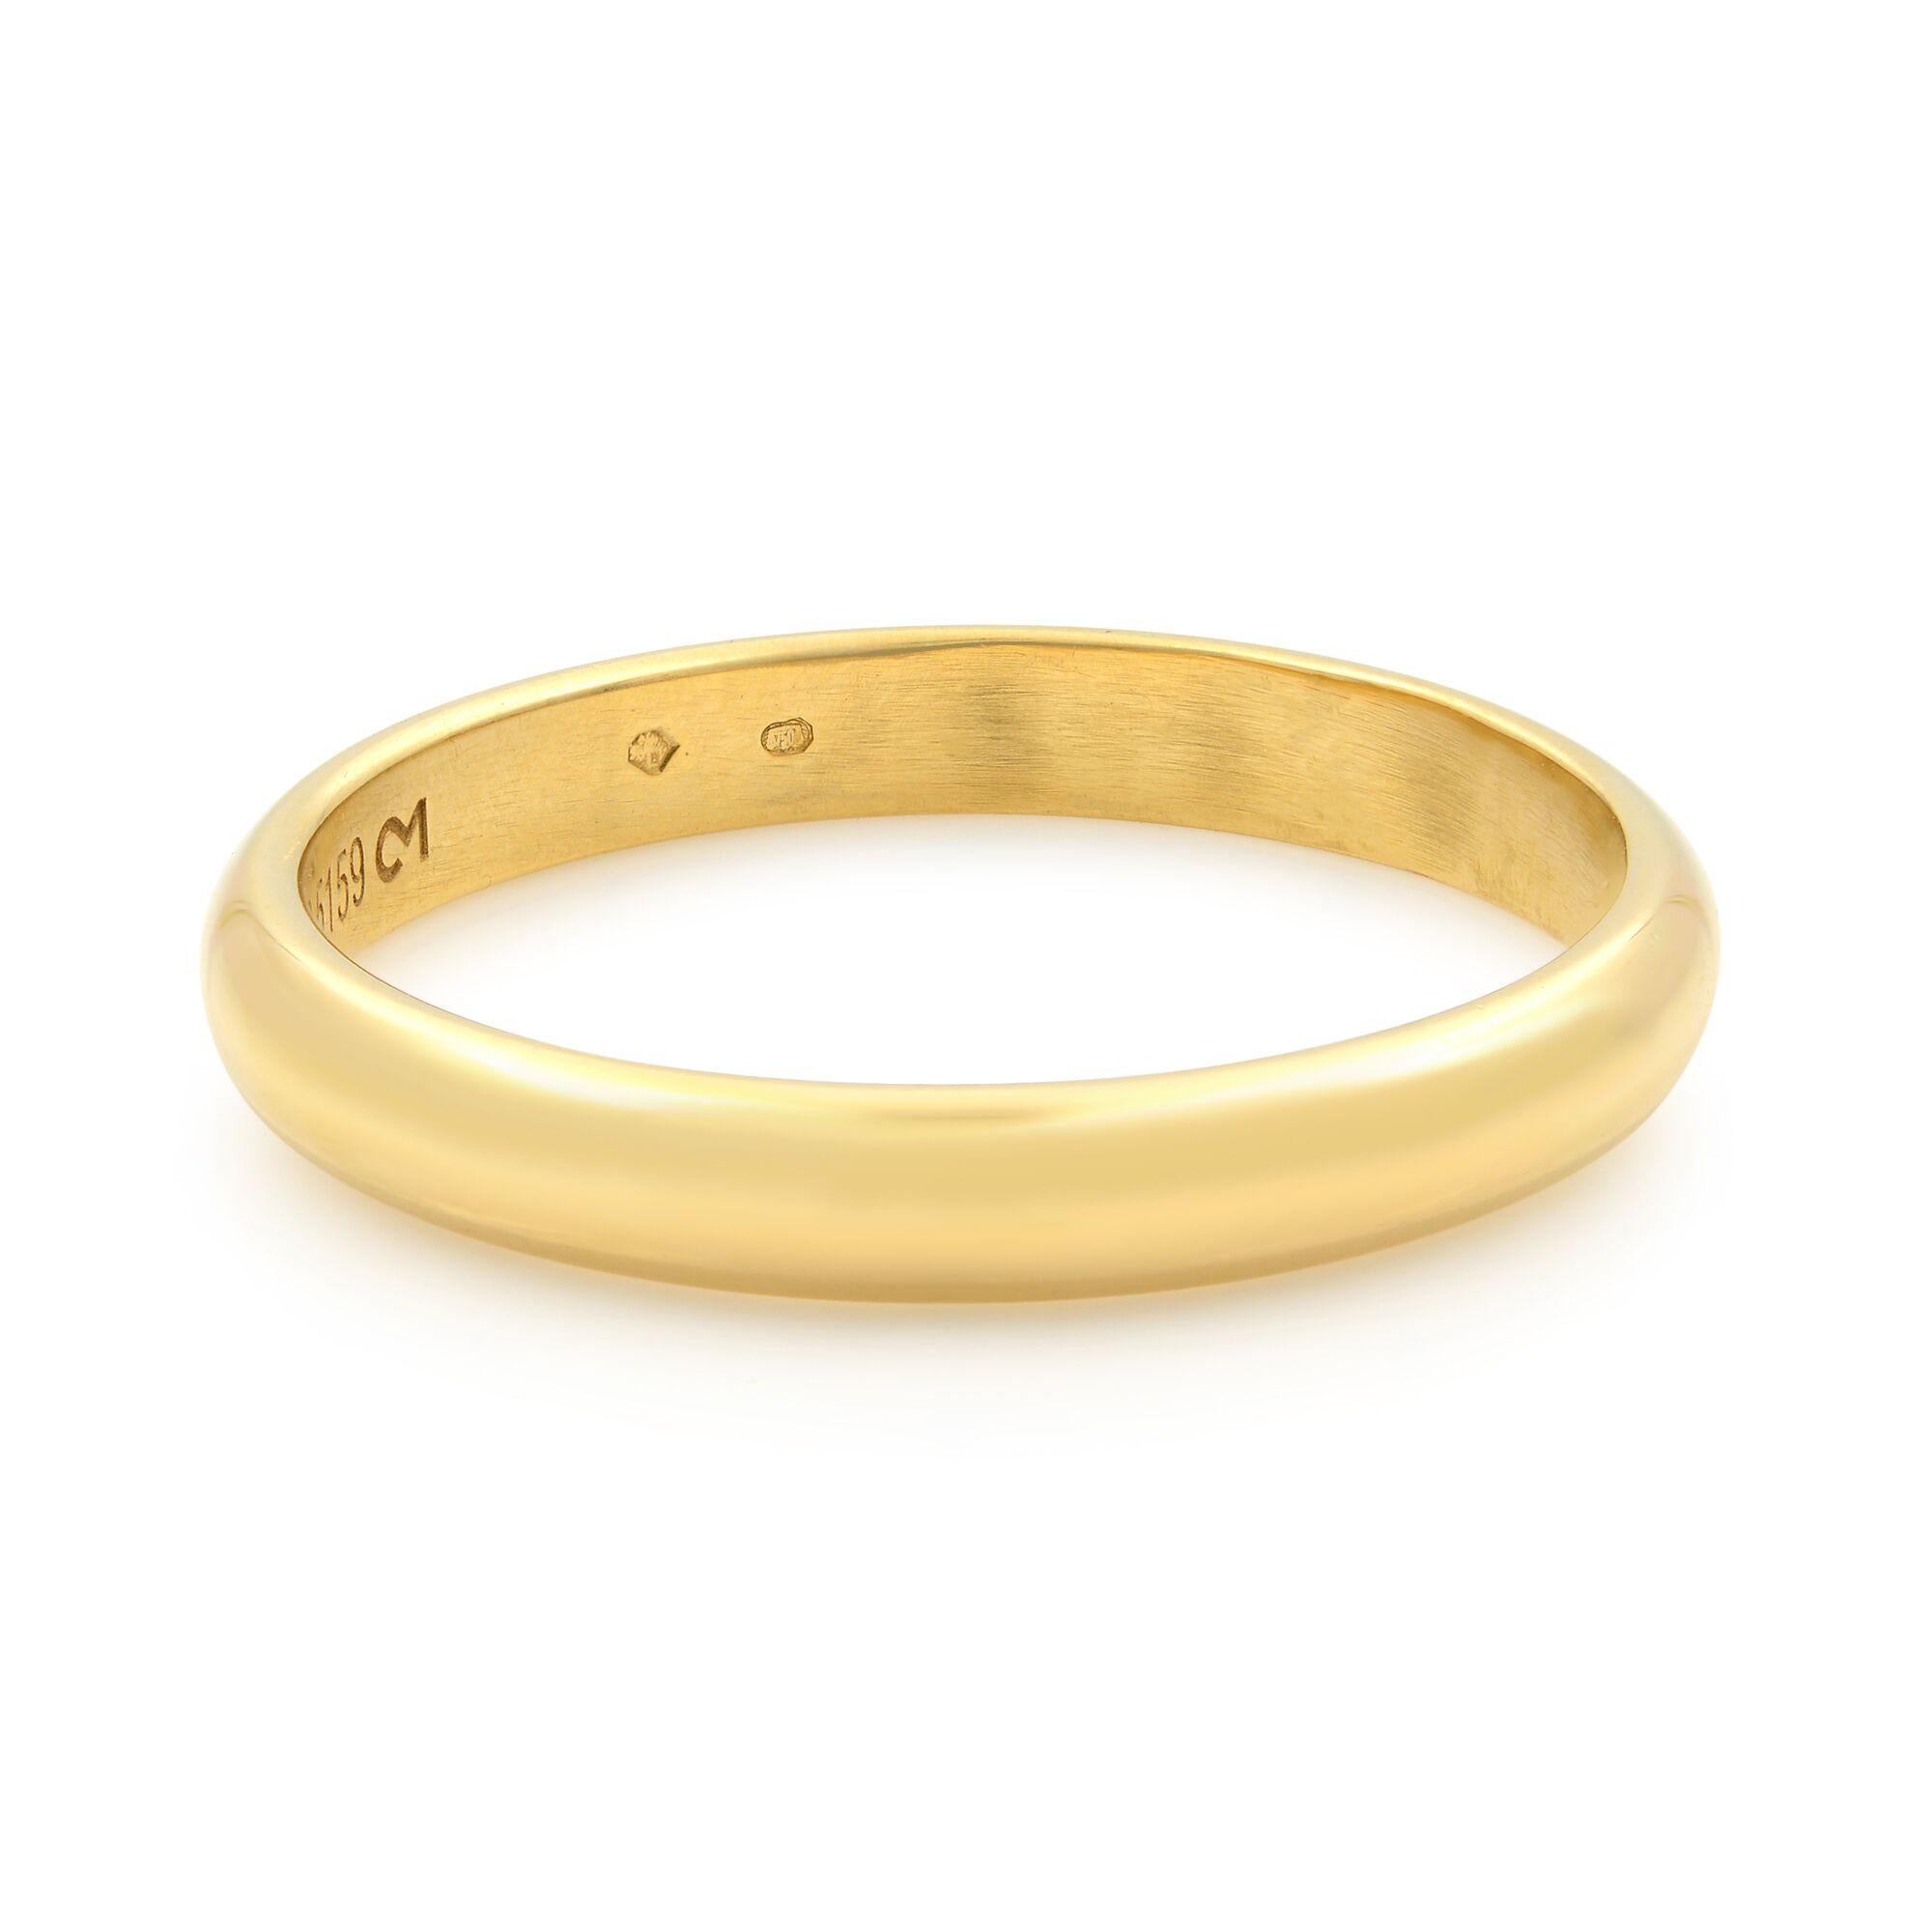 Cartier 1895 men's wedding band, width 3.5 mm, 18K yellow gold. Hallmarked. Ring Size: 12.
Condition: Pre-owned, like new. No original box and no papers. Comes in our presentation box. 